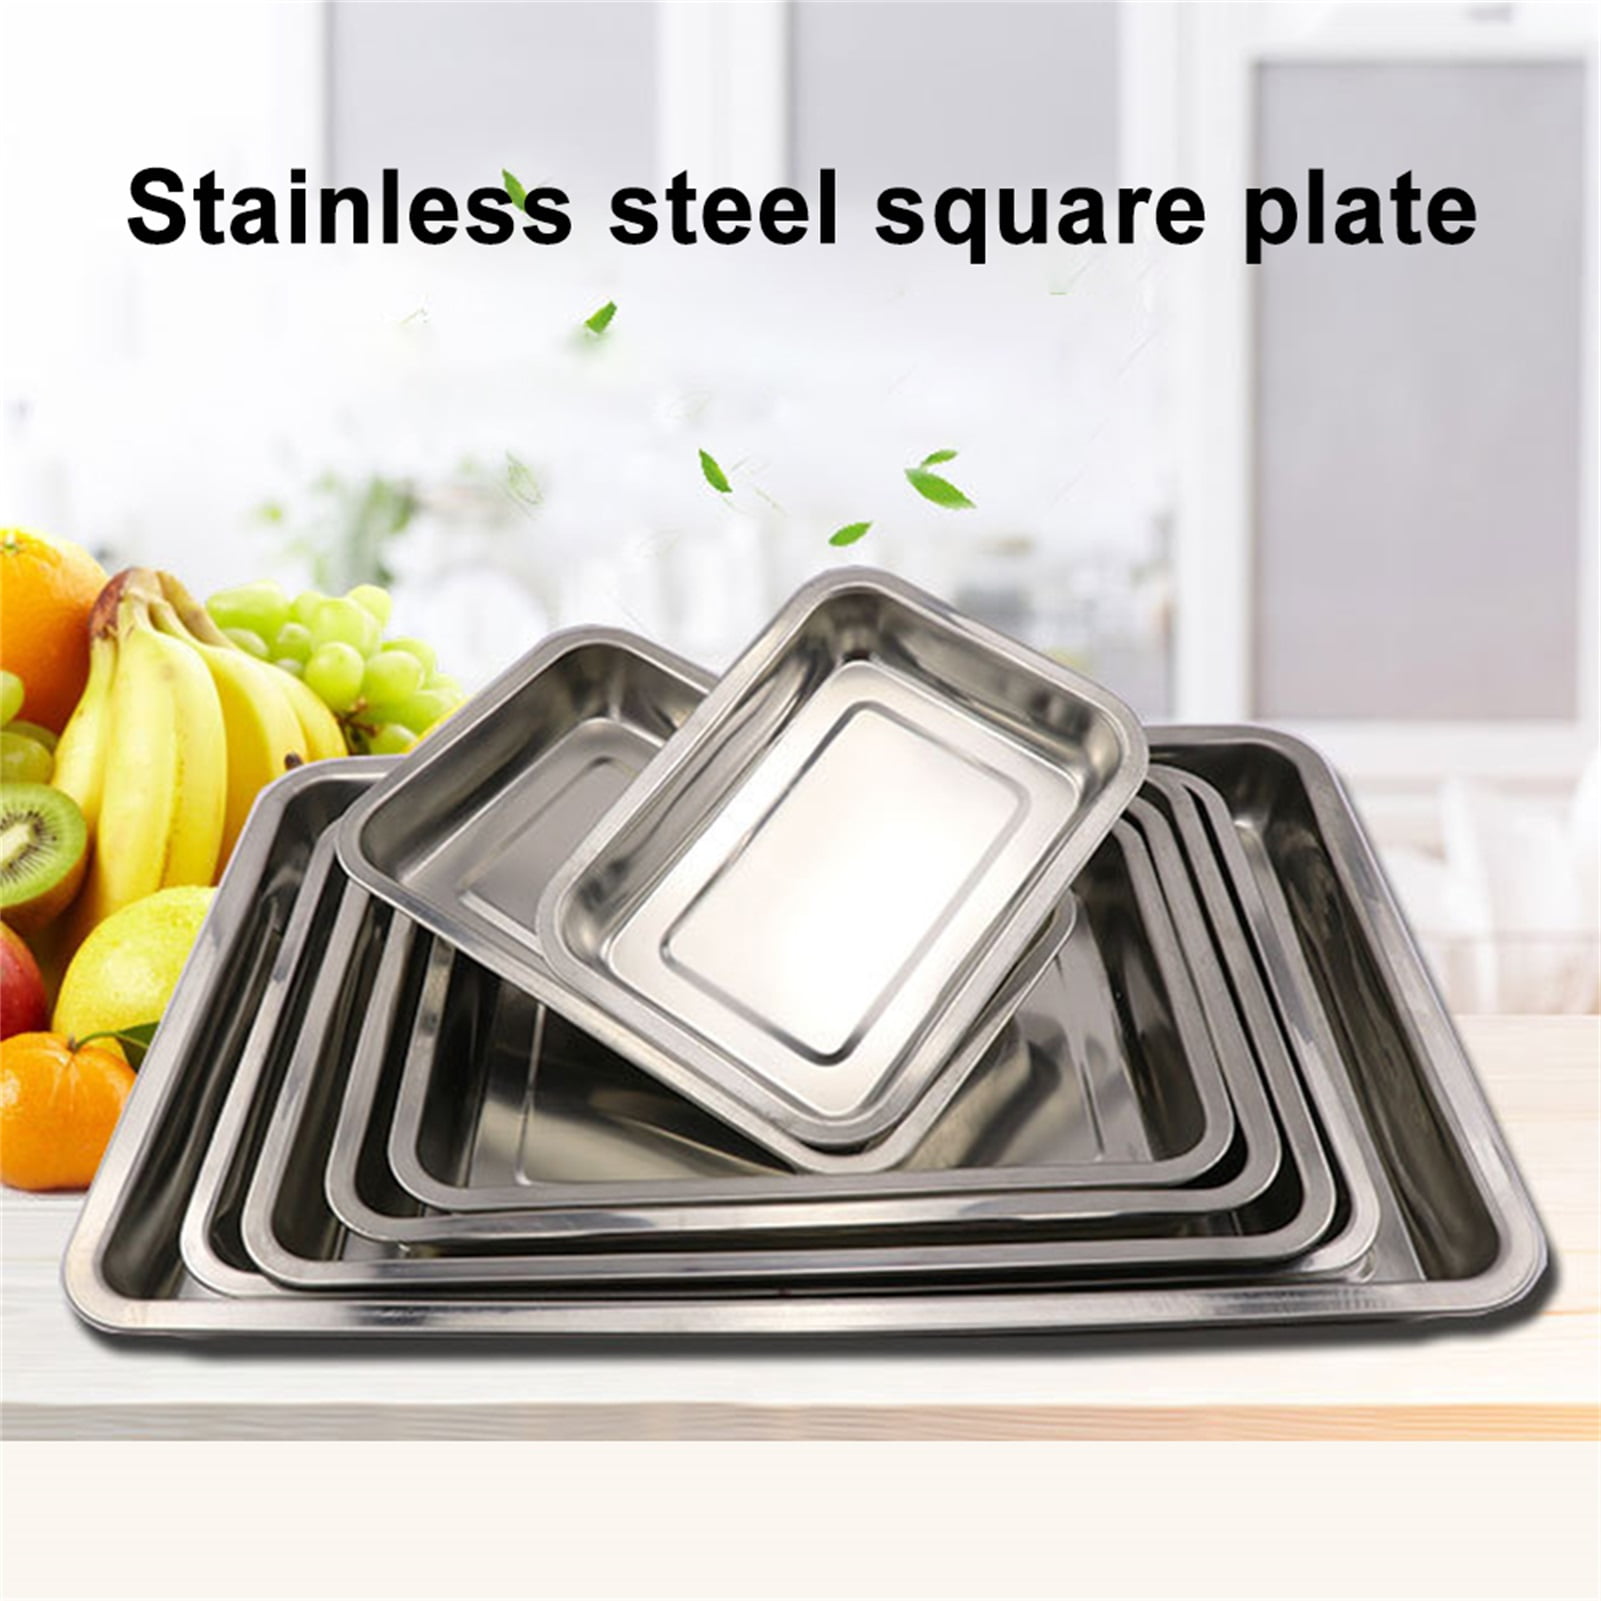 Stainless Steel Cookie Sheet Pan Baking Oven Tray Toaster Roast Large 15*11inch 